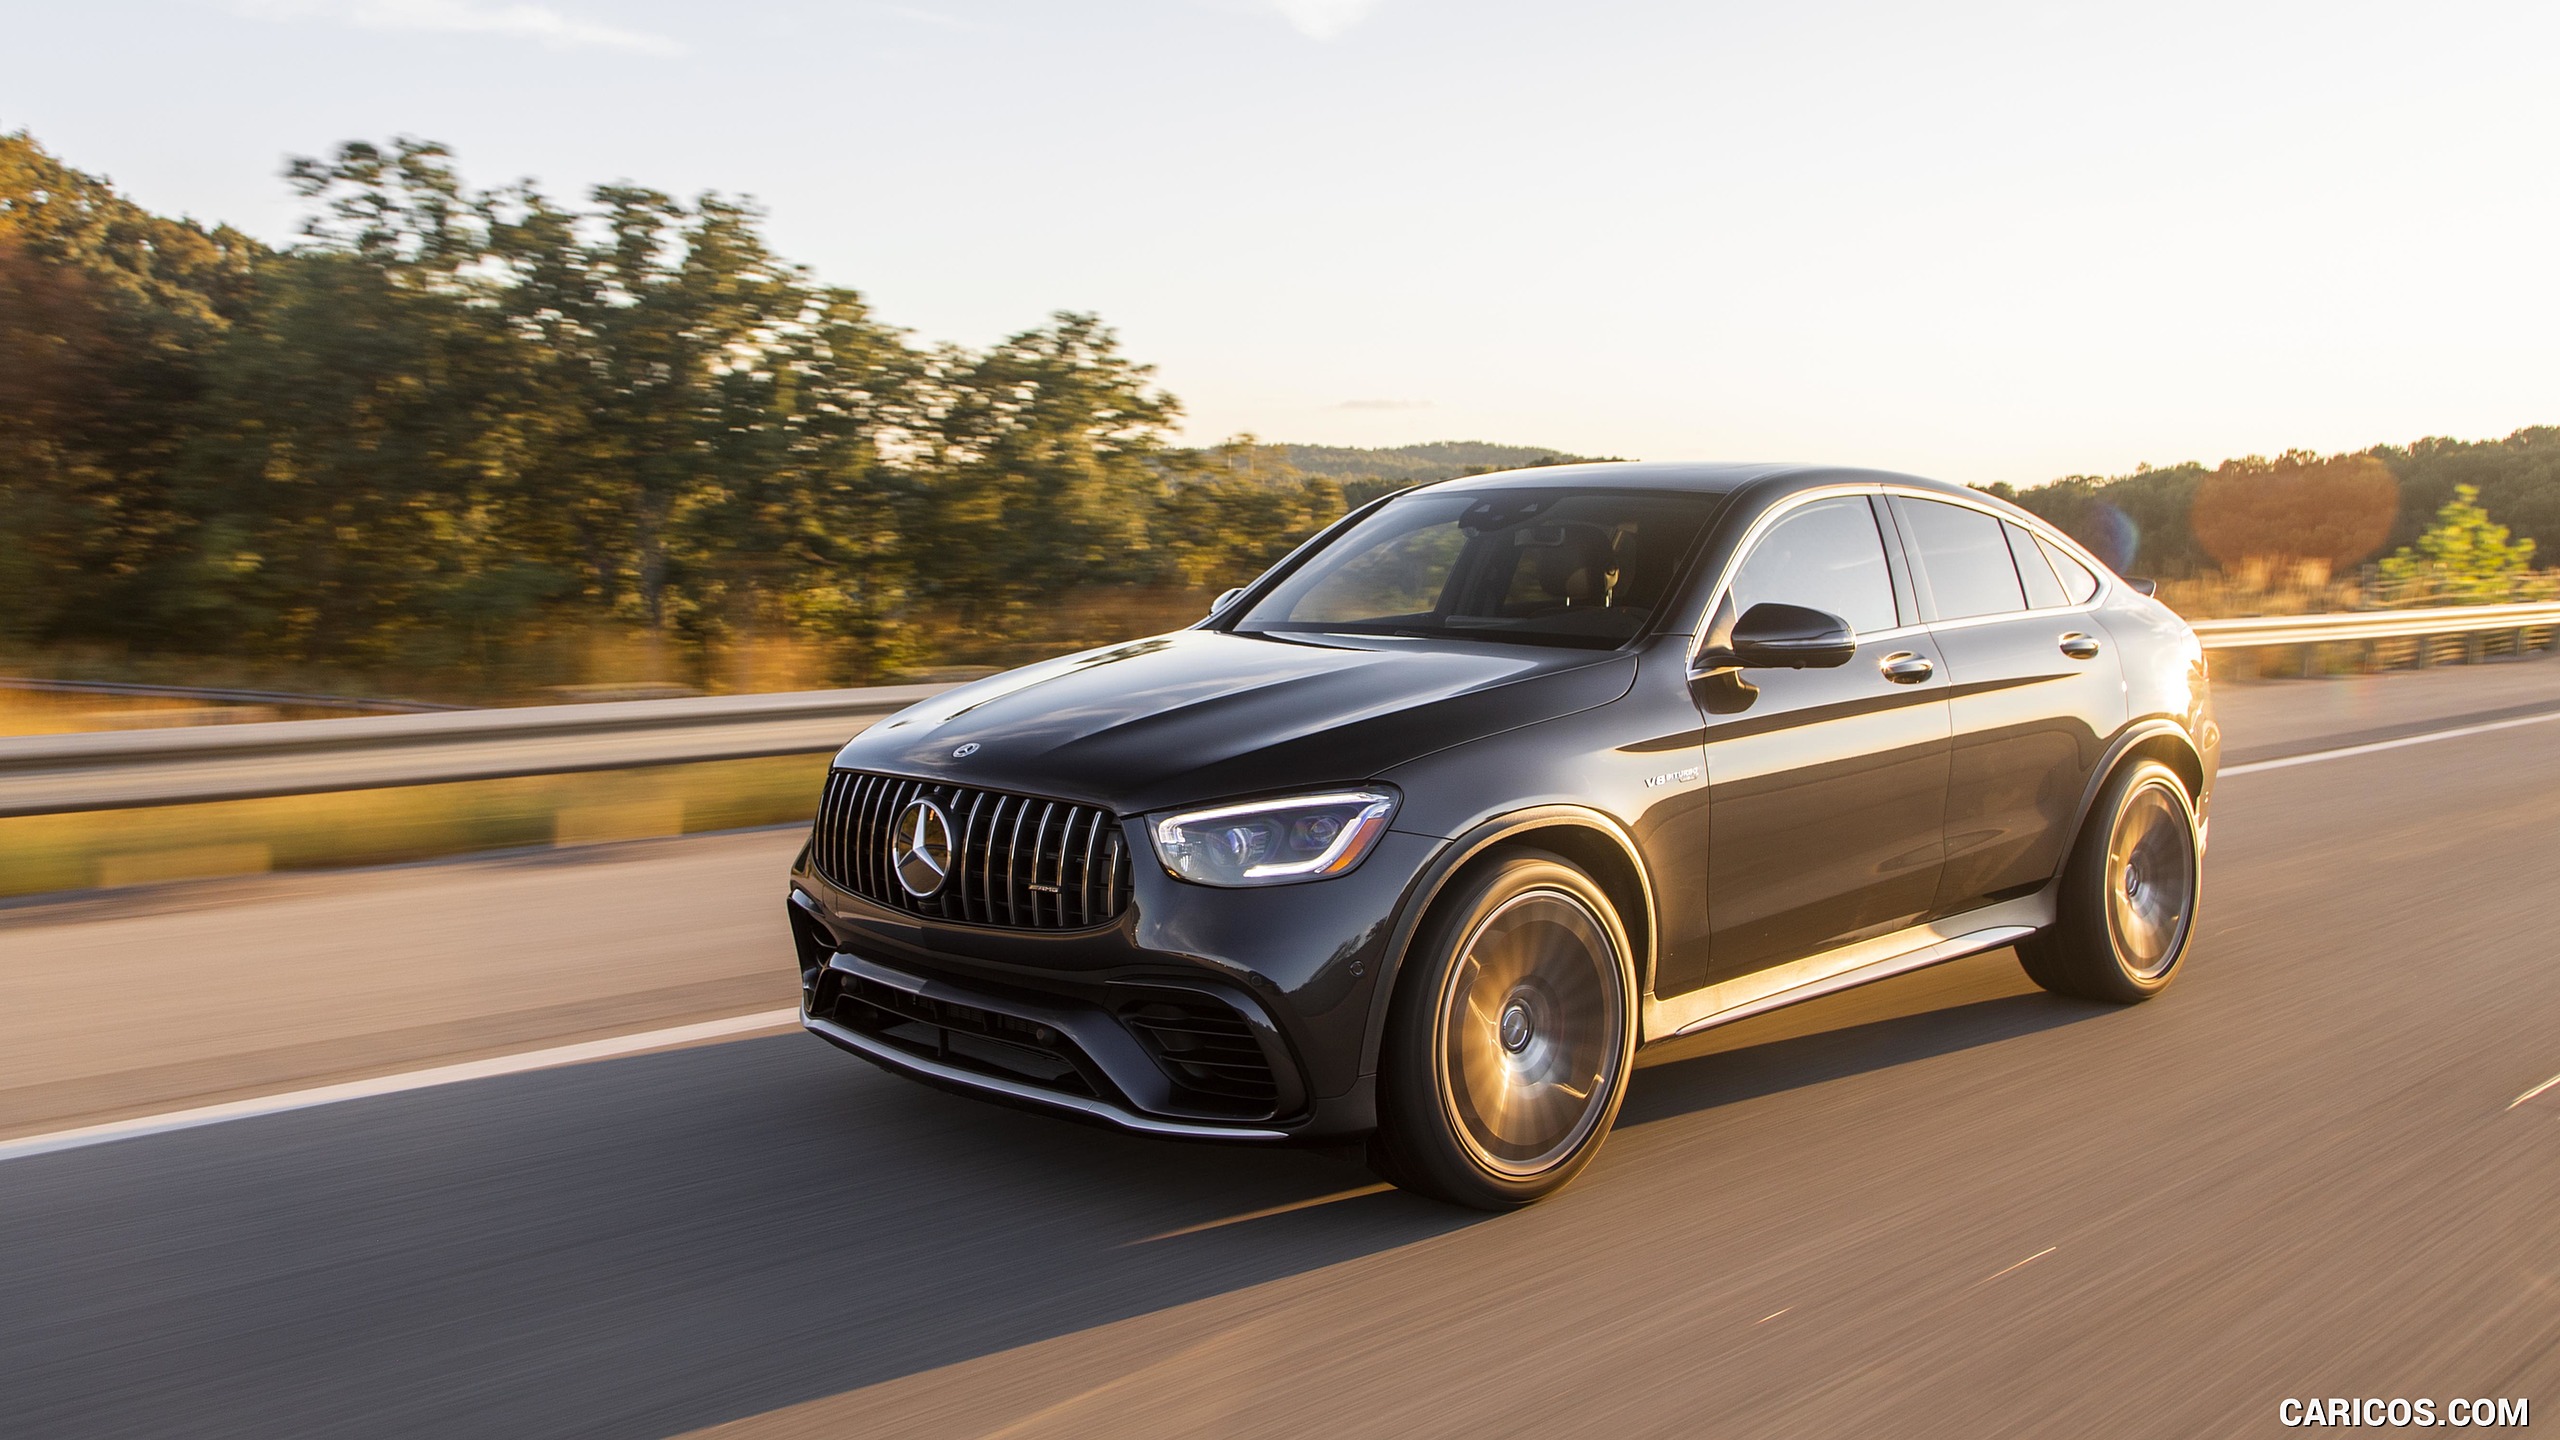 2020 Mercedes-AMG GLC 63 S Coupe (US-Spec) - Front Three-Quarter, #47 of 102